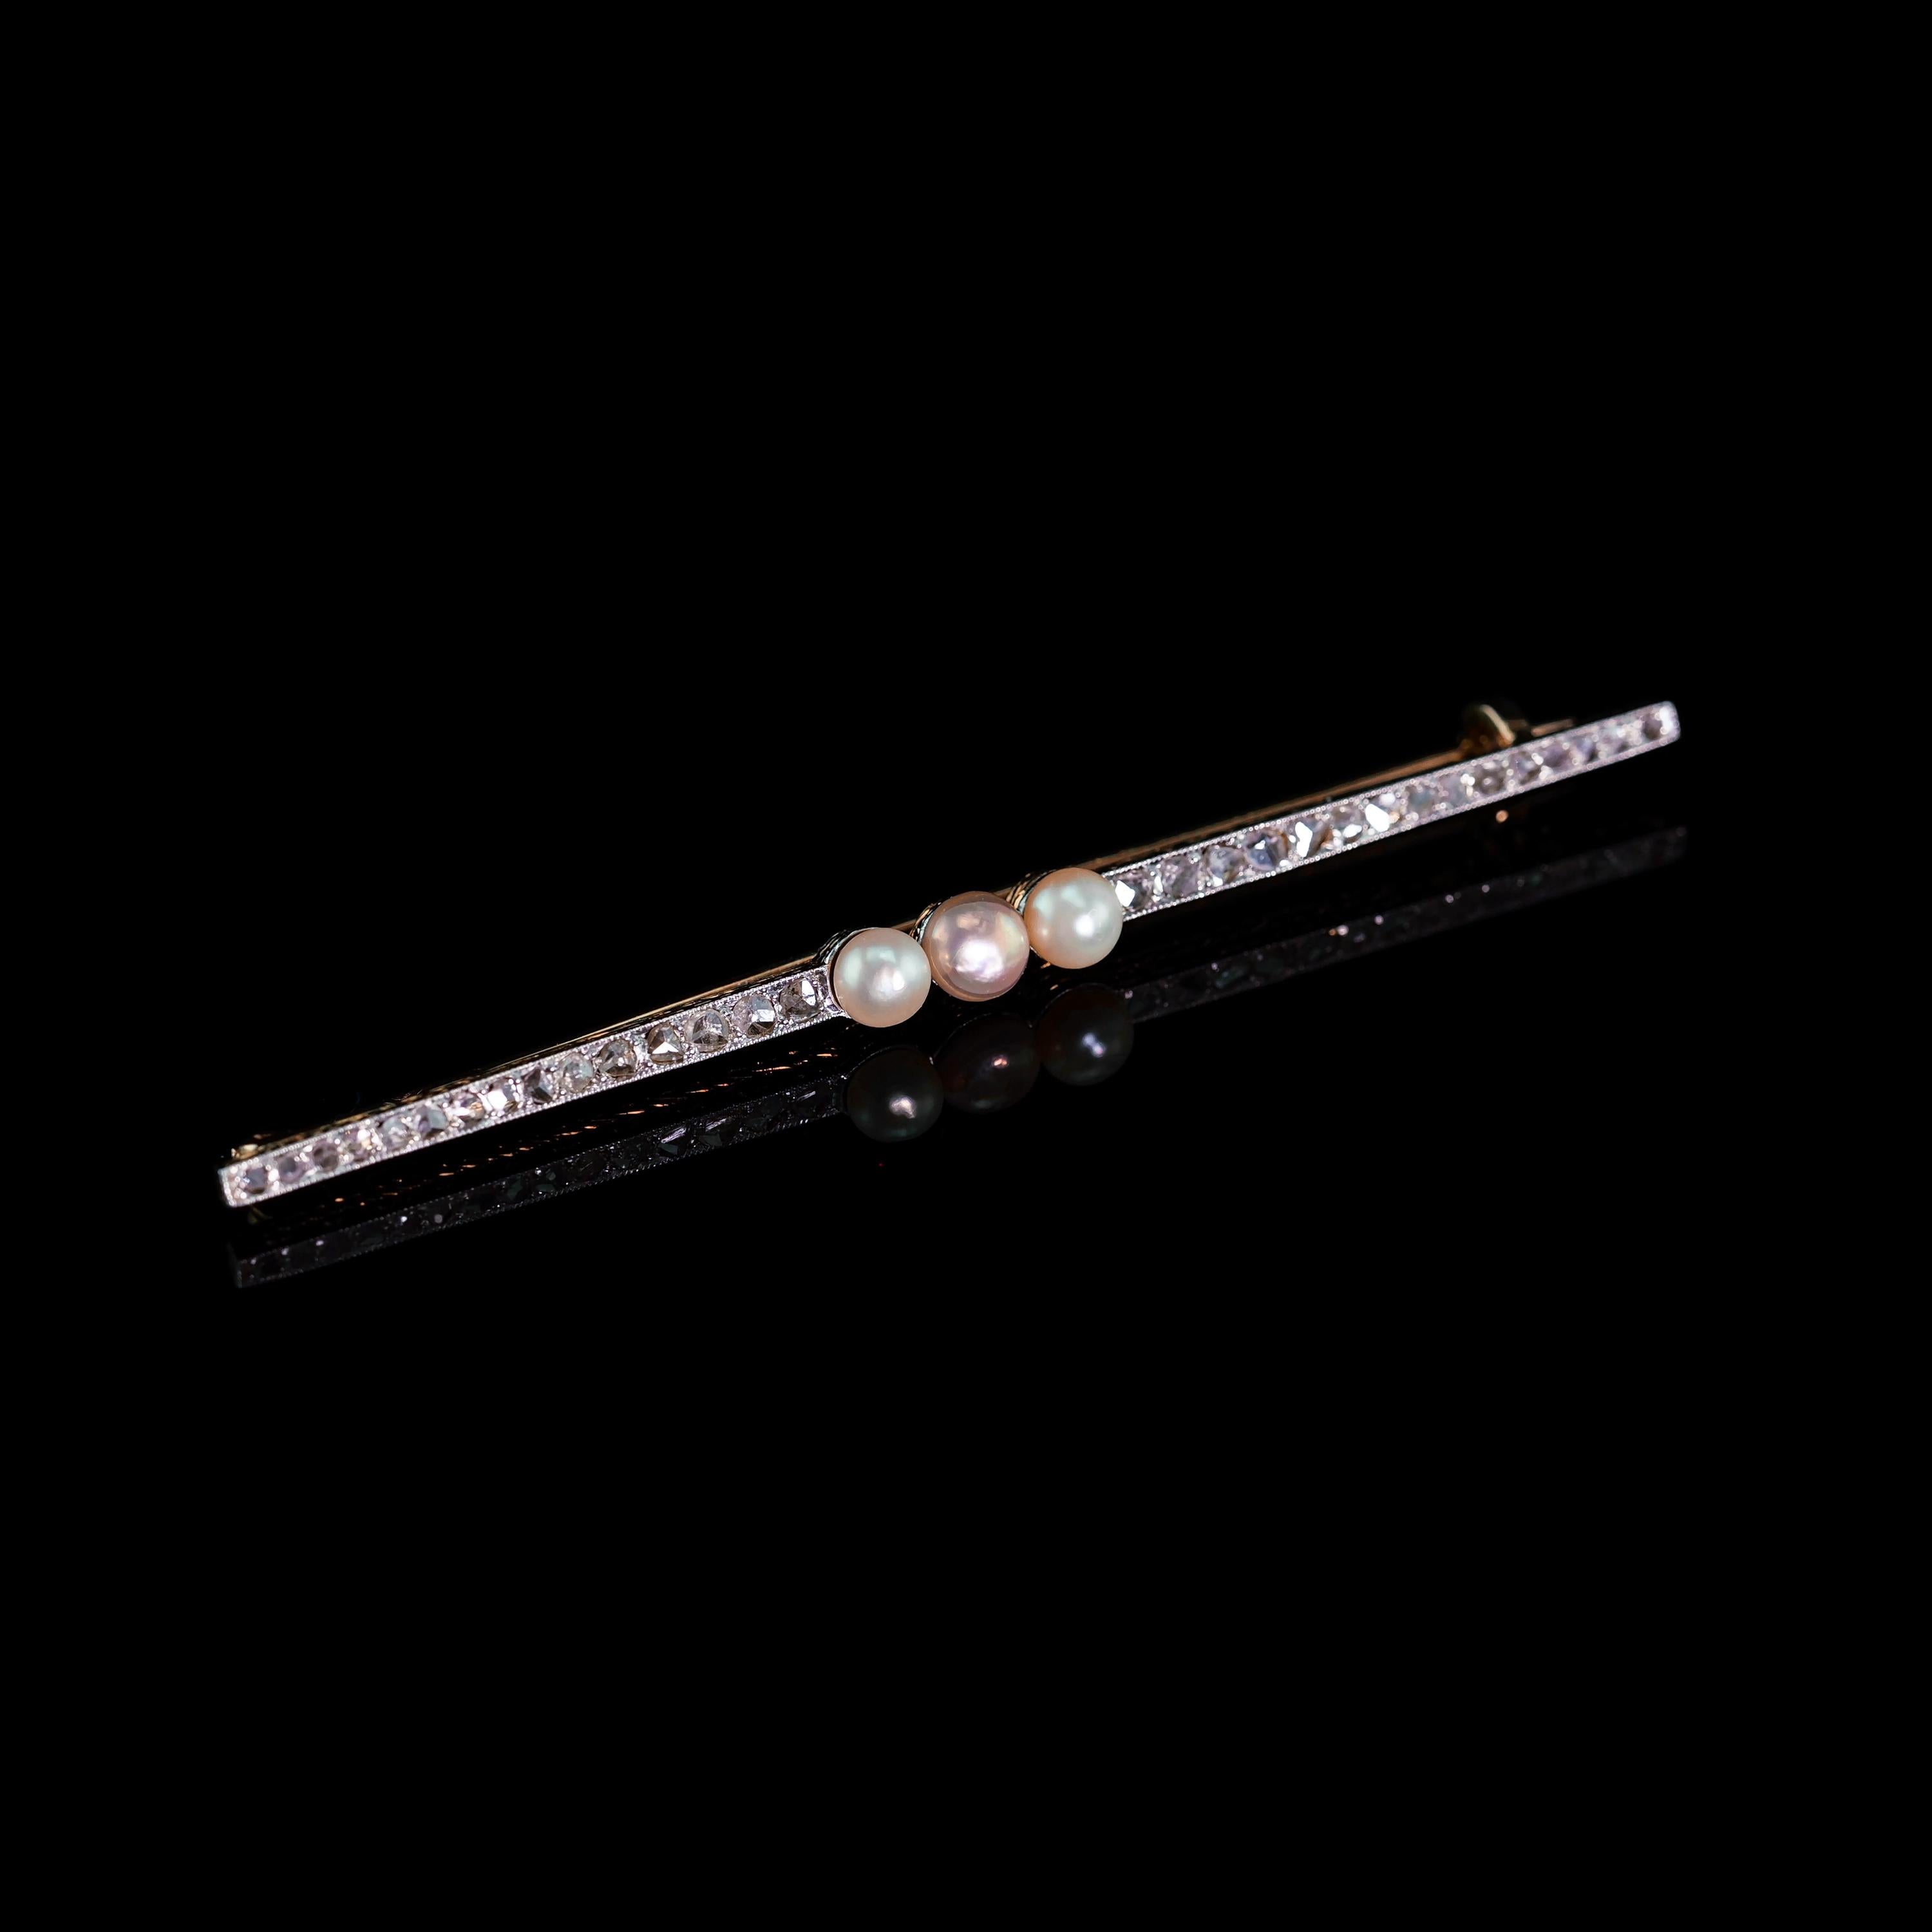 Women's or Men's Antique 18ct Gold & Platinum Pink Pearl & Diamond Brooch - c.1920 For Sale